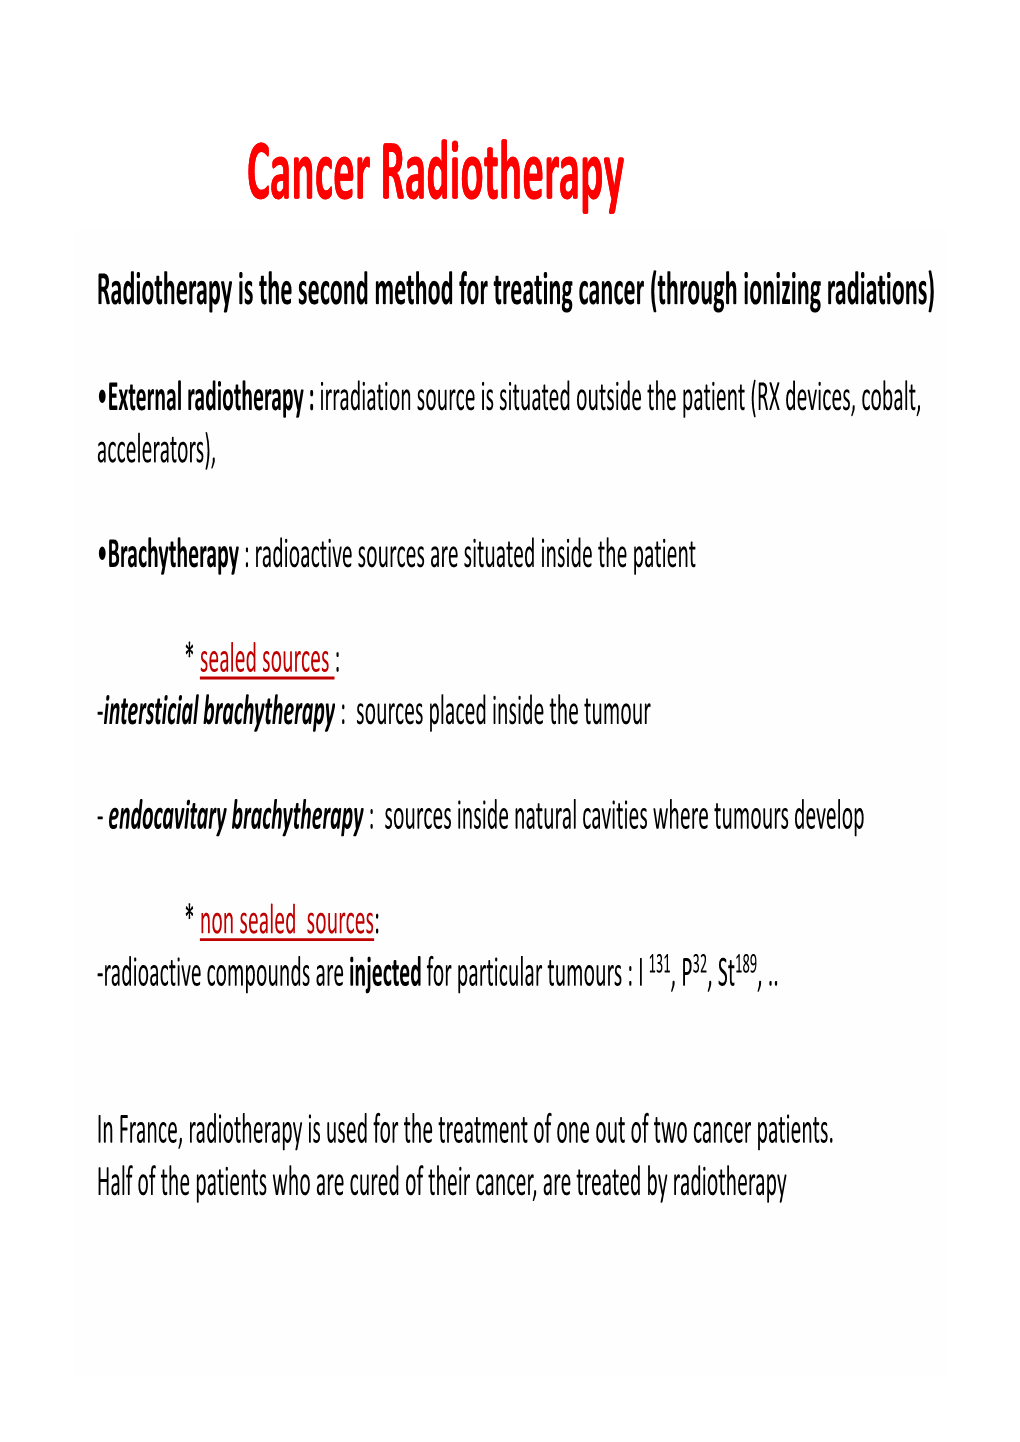 Radiotherapy Is the Second Method for Treating Cancer (Through Ionizing Radiations)